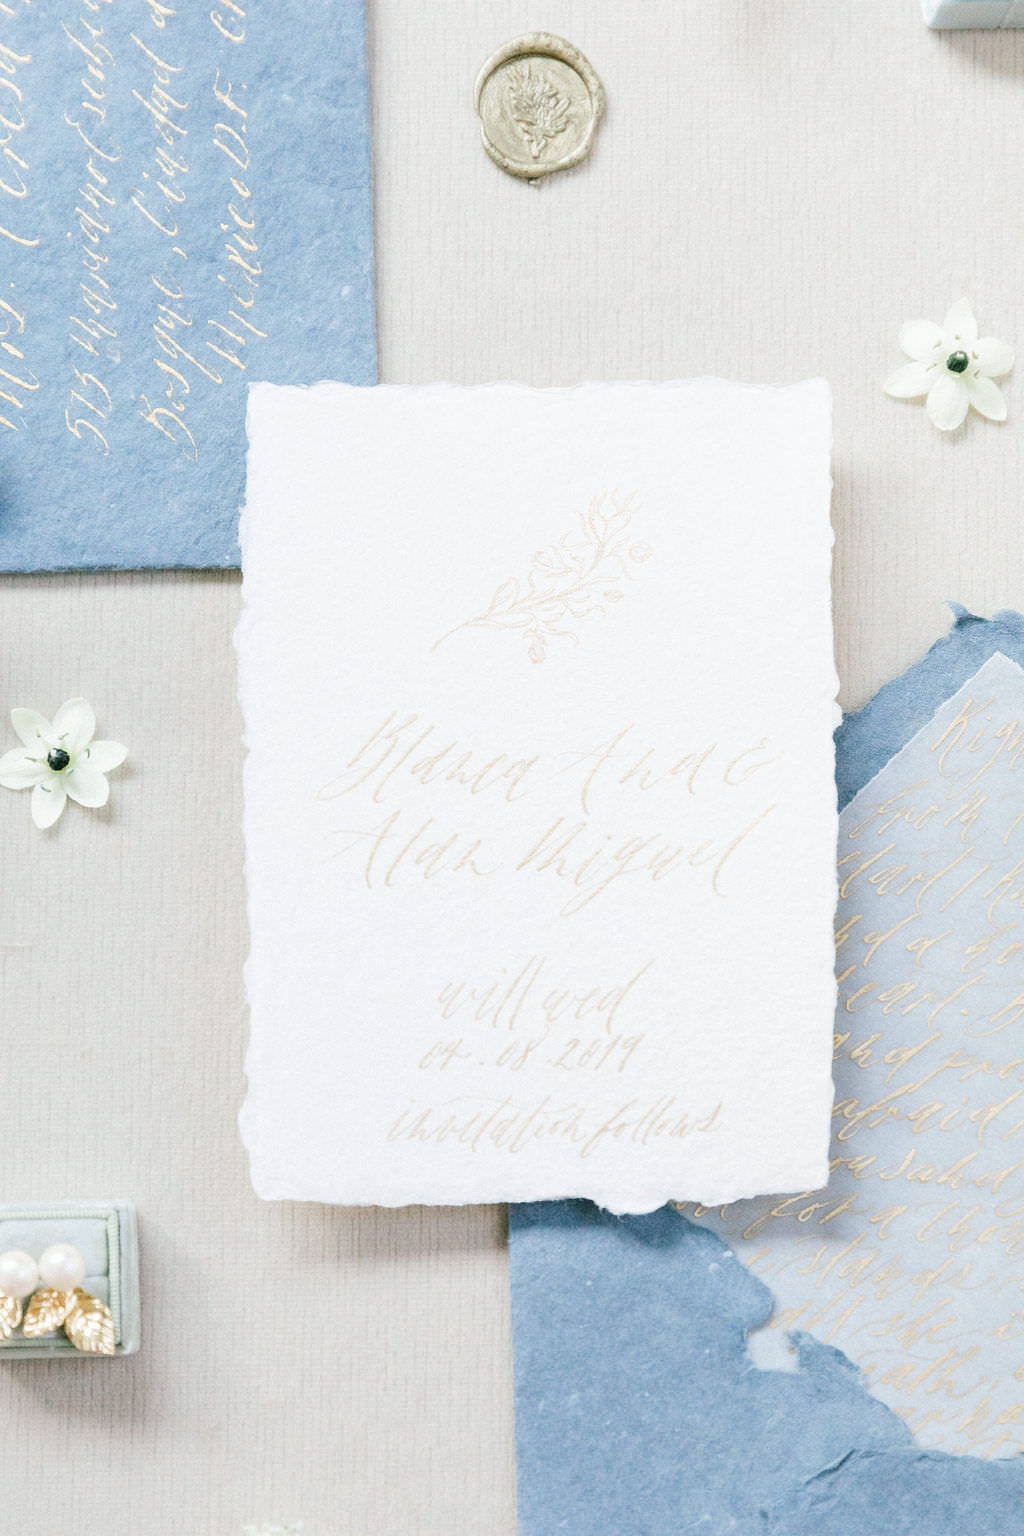 Blue and gold vintage wedding invitations - Isabella Rodríguez Photography